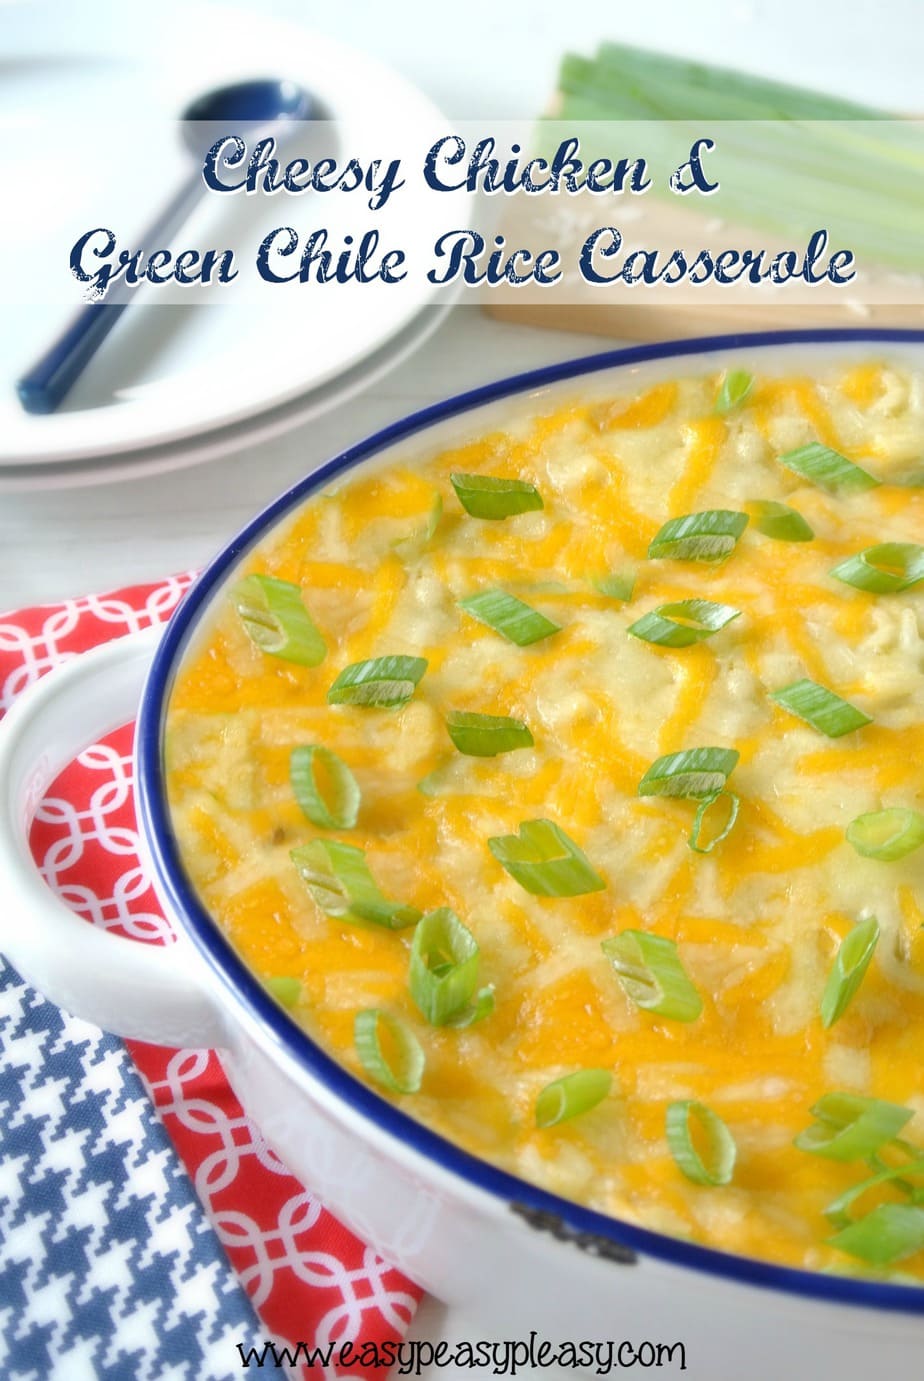 Try this delicious Cheesy Chicken and Green Chile Rice Casserole for an easy weeknight meal.